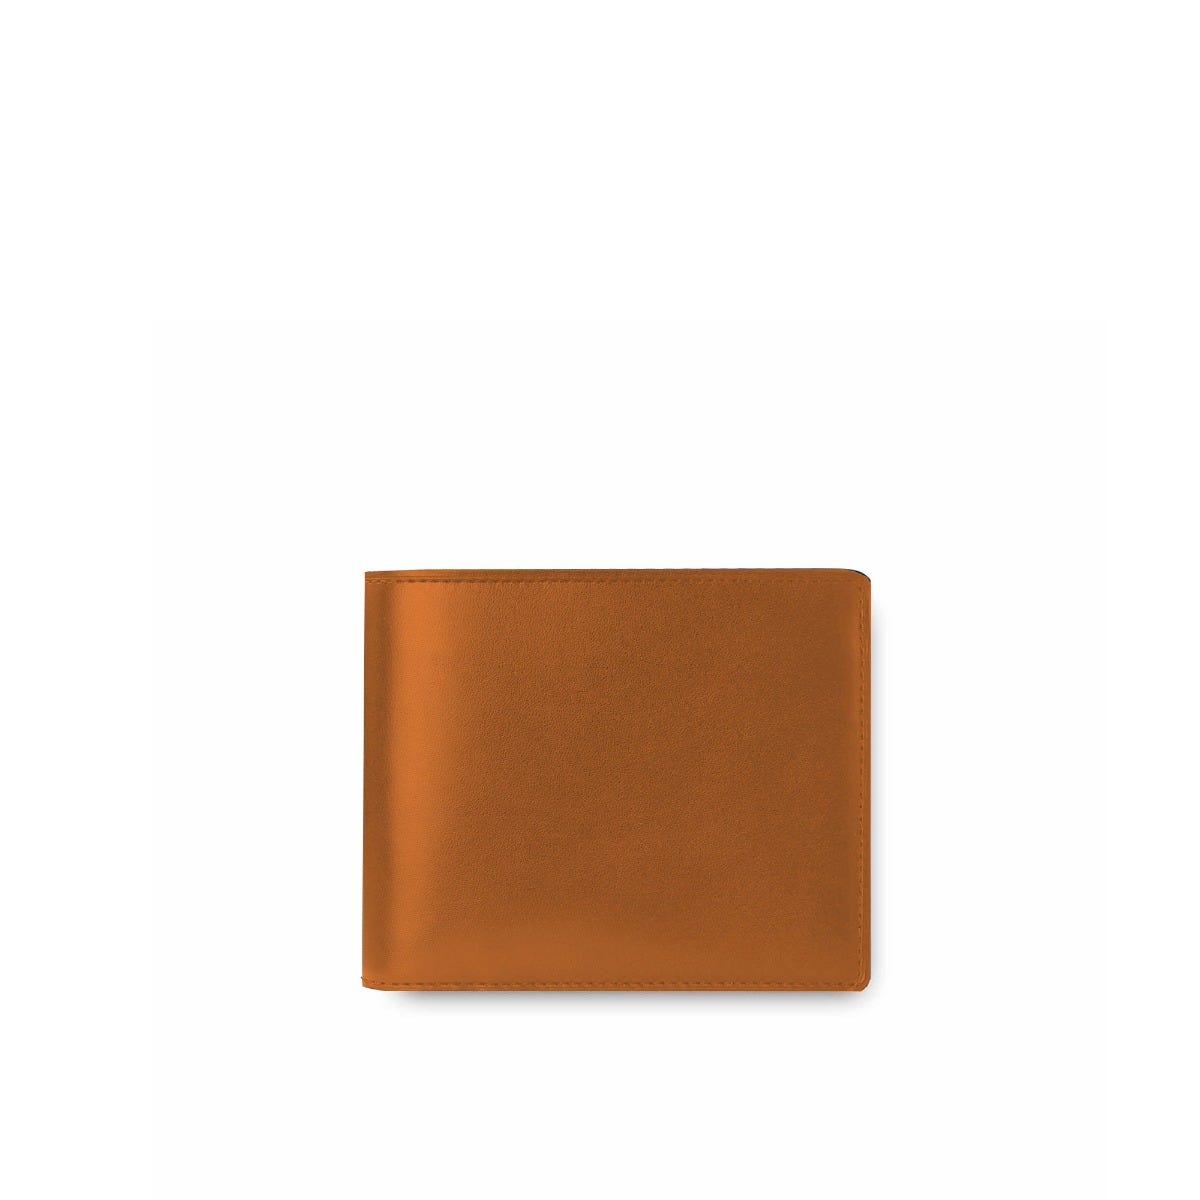 Hanover 8cc Billfold Wallet in Saddle Leather